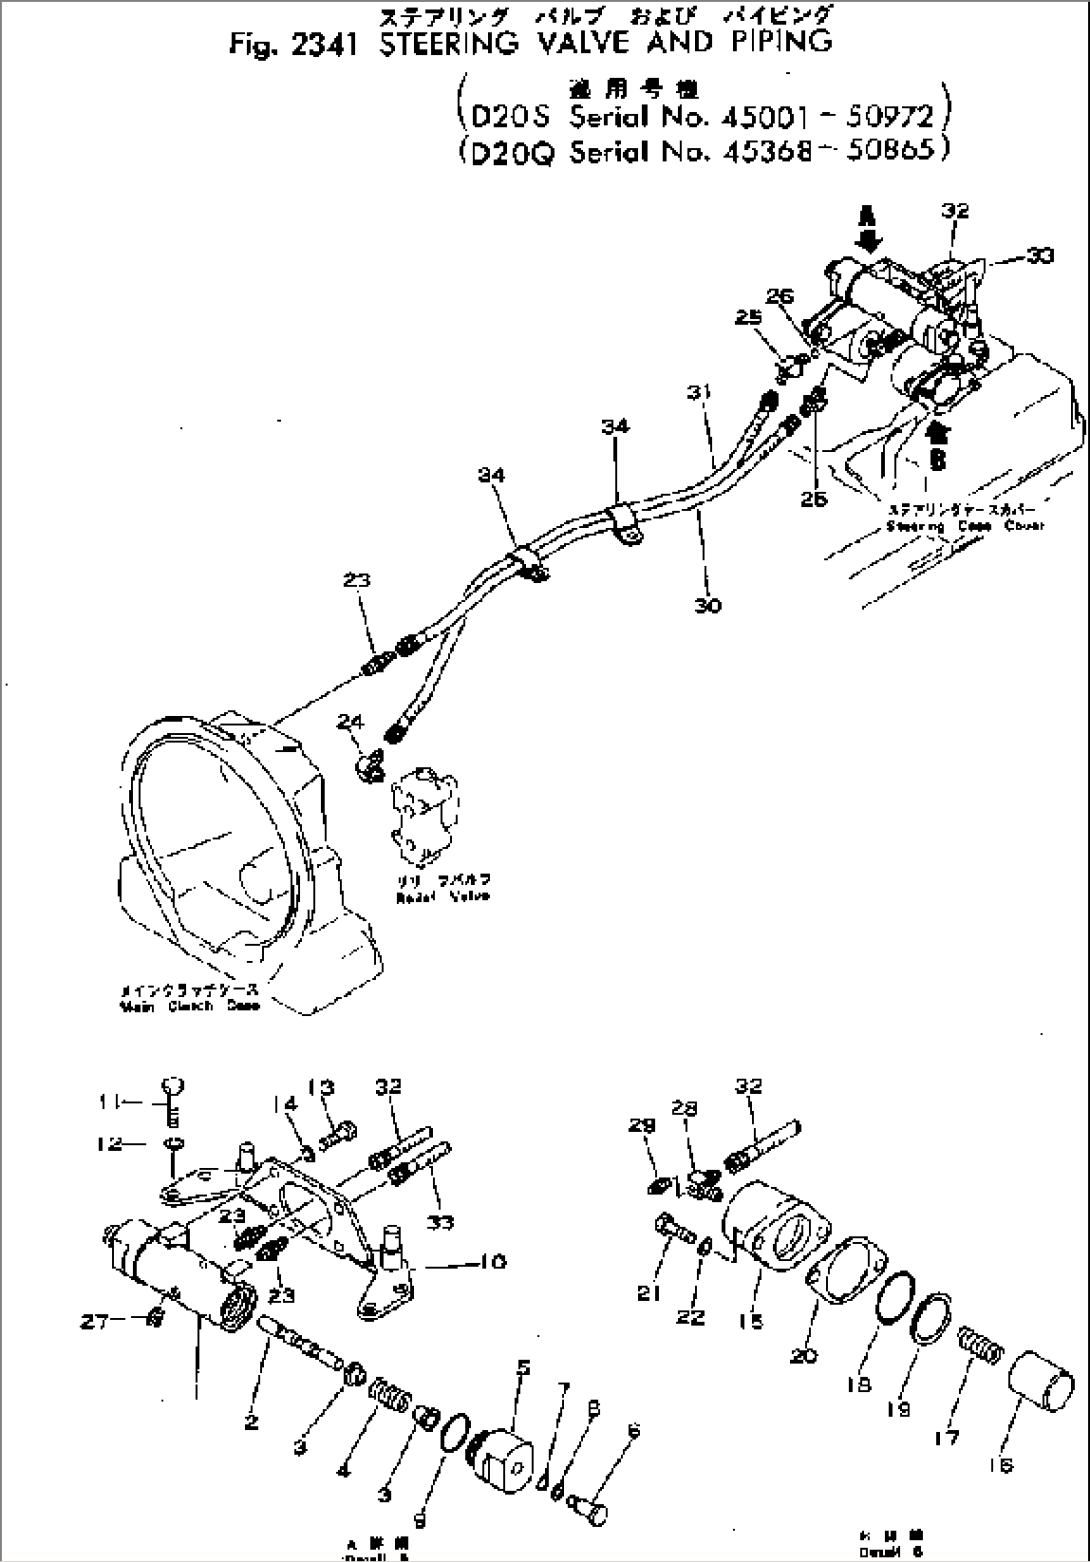 STEERING VALVE AND PIPING(#45001-50972)